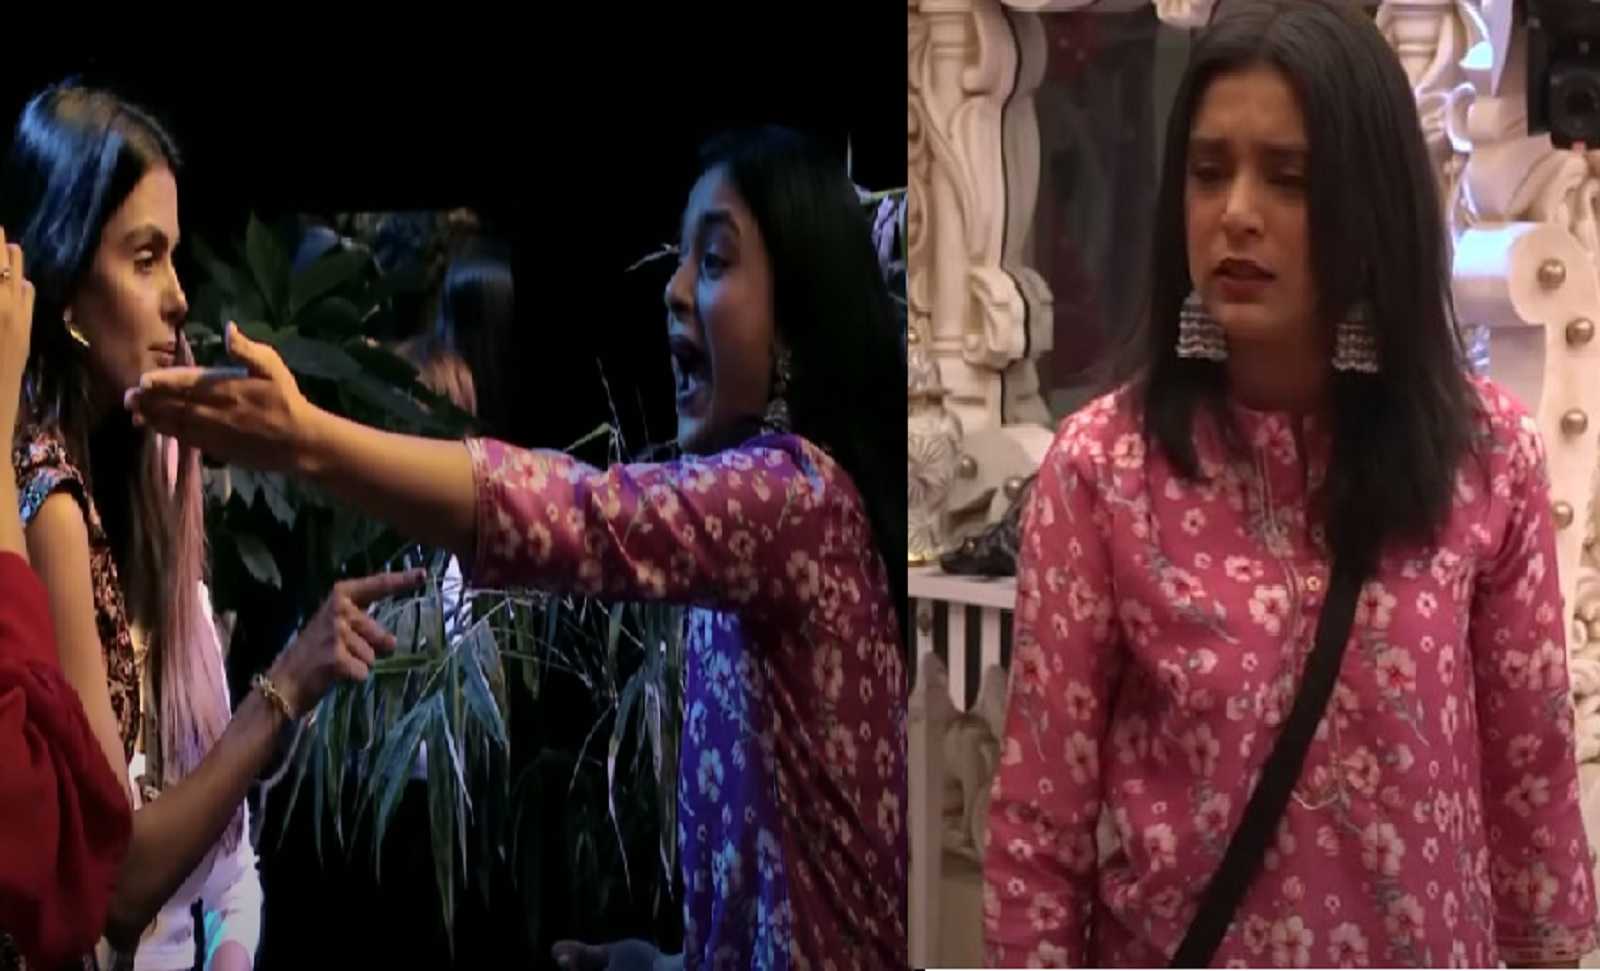 Bigg Boss 16: Sumbul miffed at Priyanka for making issue about touching her, says 'main thappad mar dungi toh kuch....'